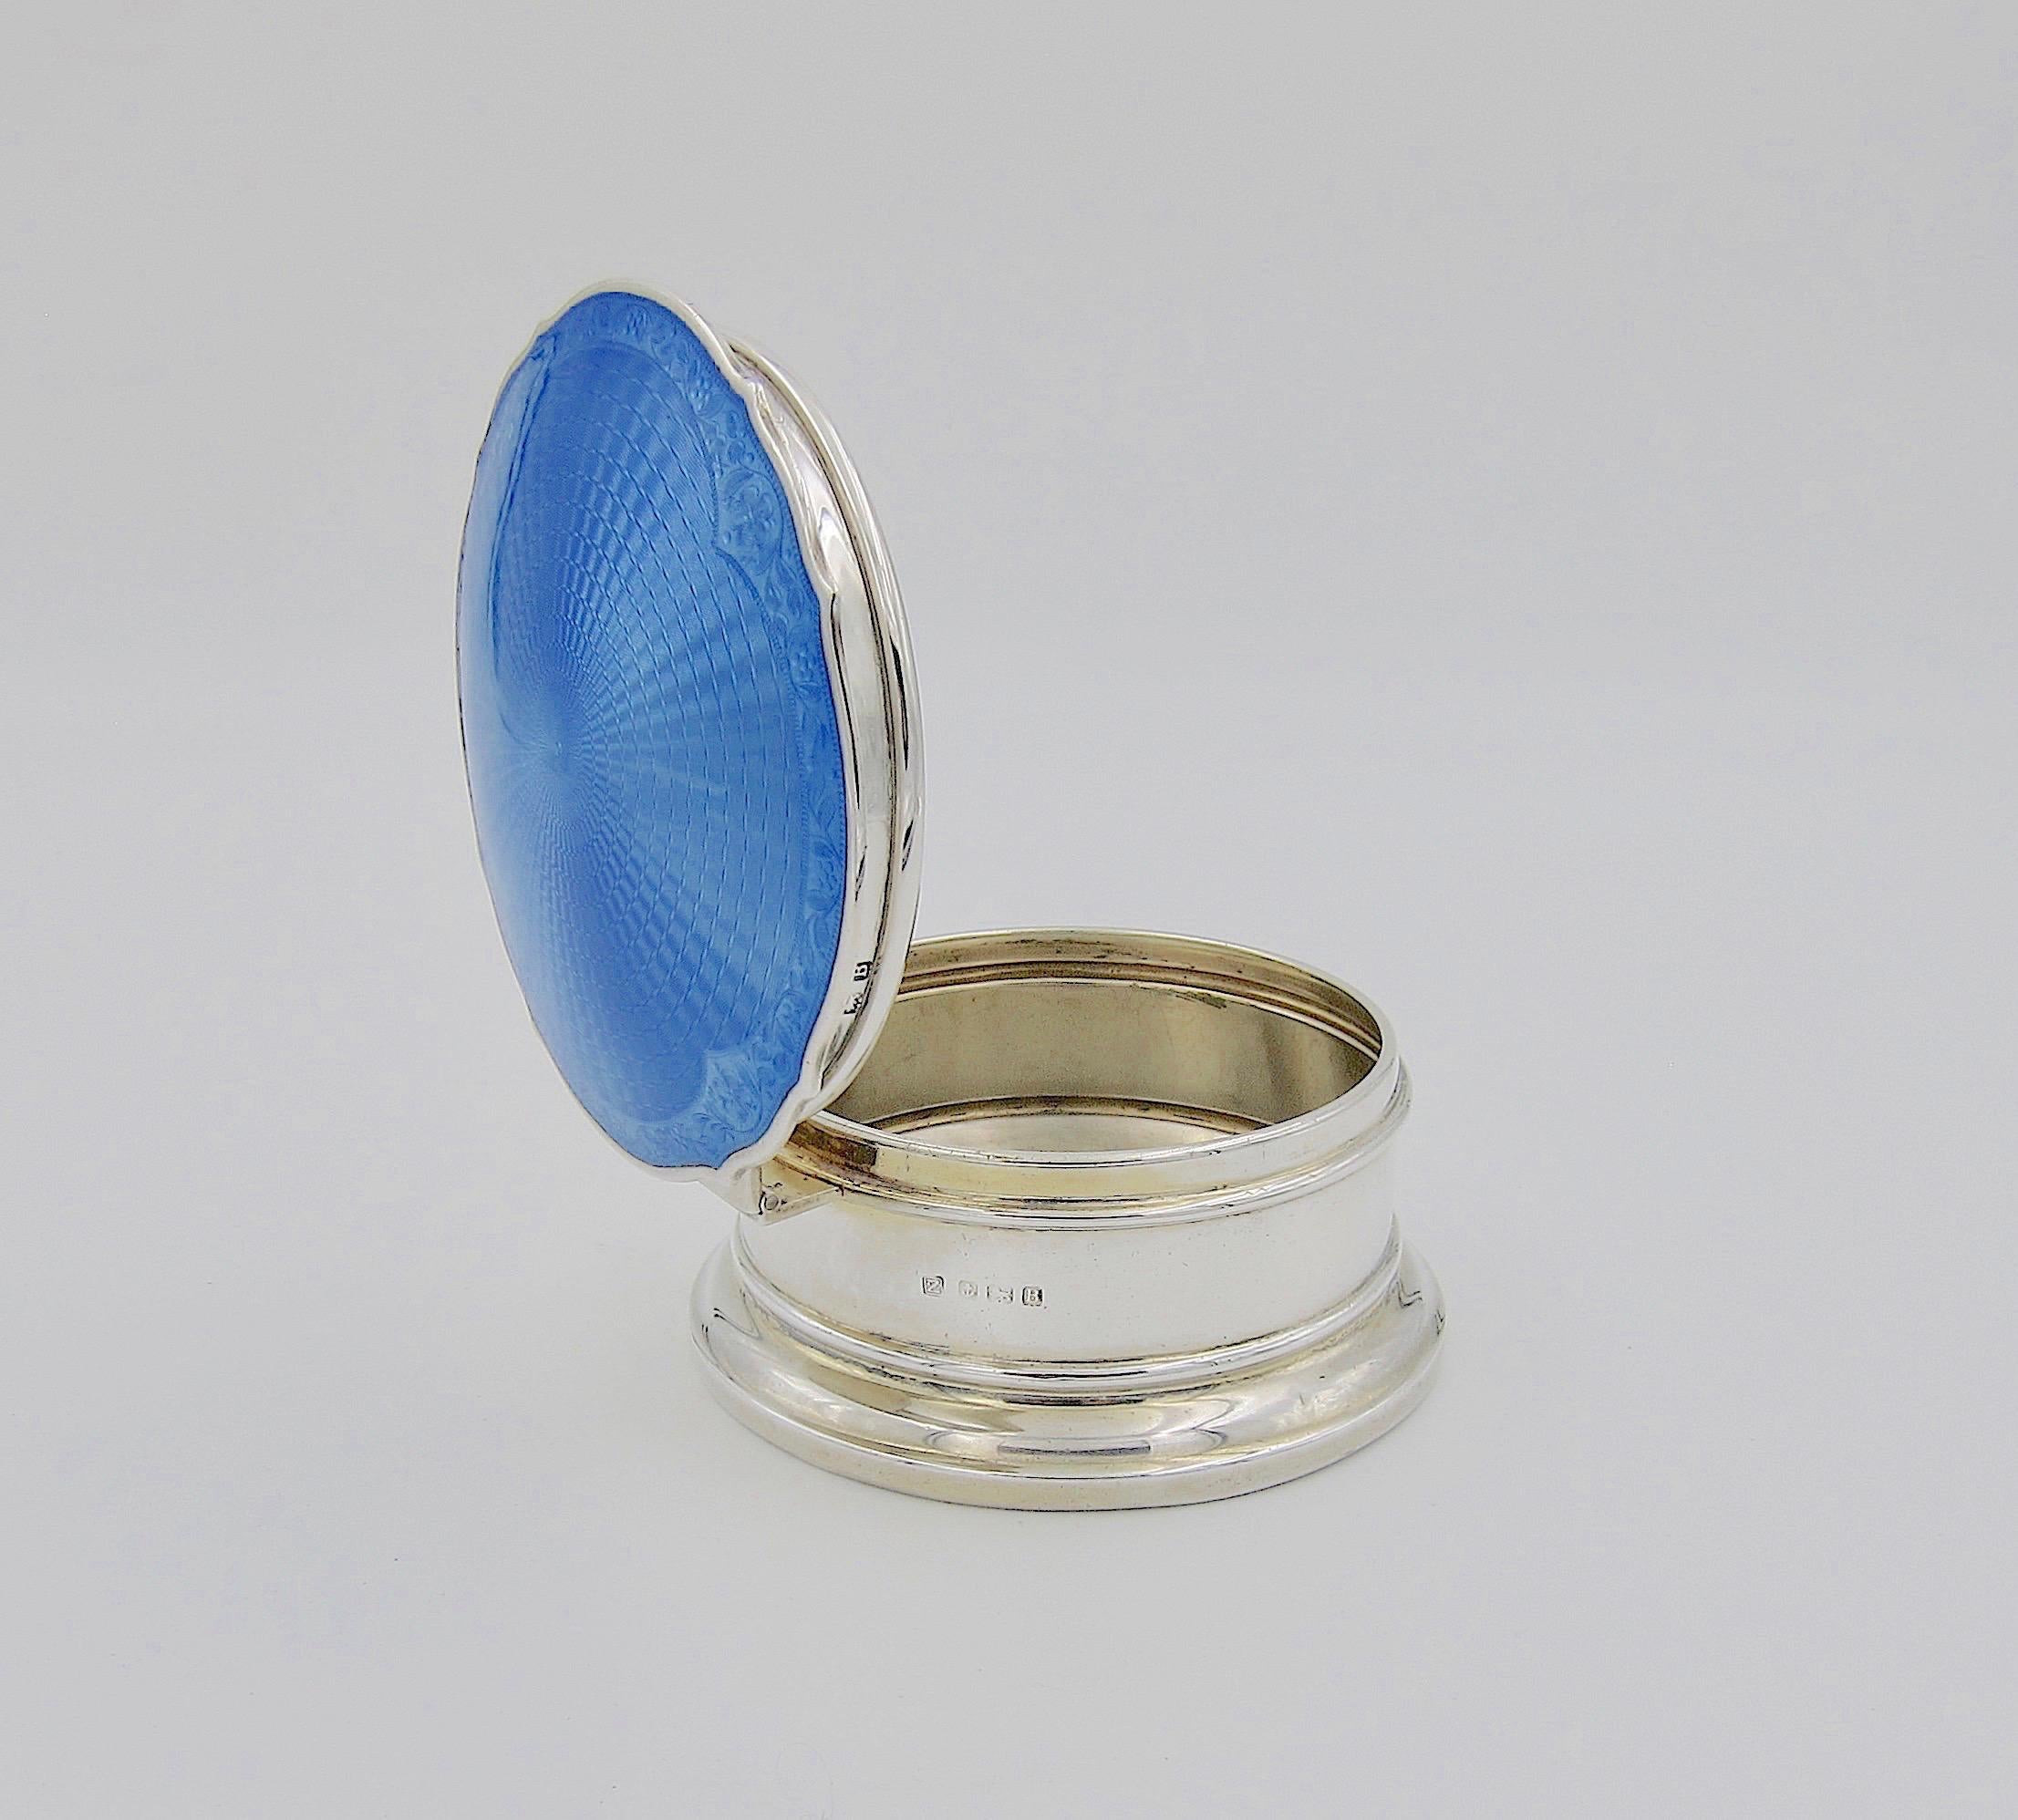 An English Art Deco sterling silver and guilloche enamel hinged circular box from A & J Zimmerman silversmiths of London and Birmingham, date marked 1926. At 4 inches diameter, the piece is an ideal size for storing keepsakes or jewelry; it would